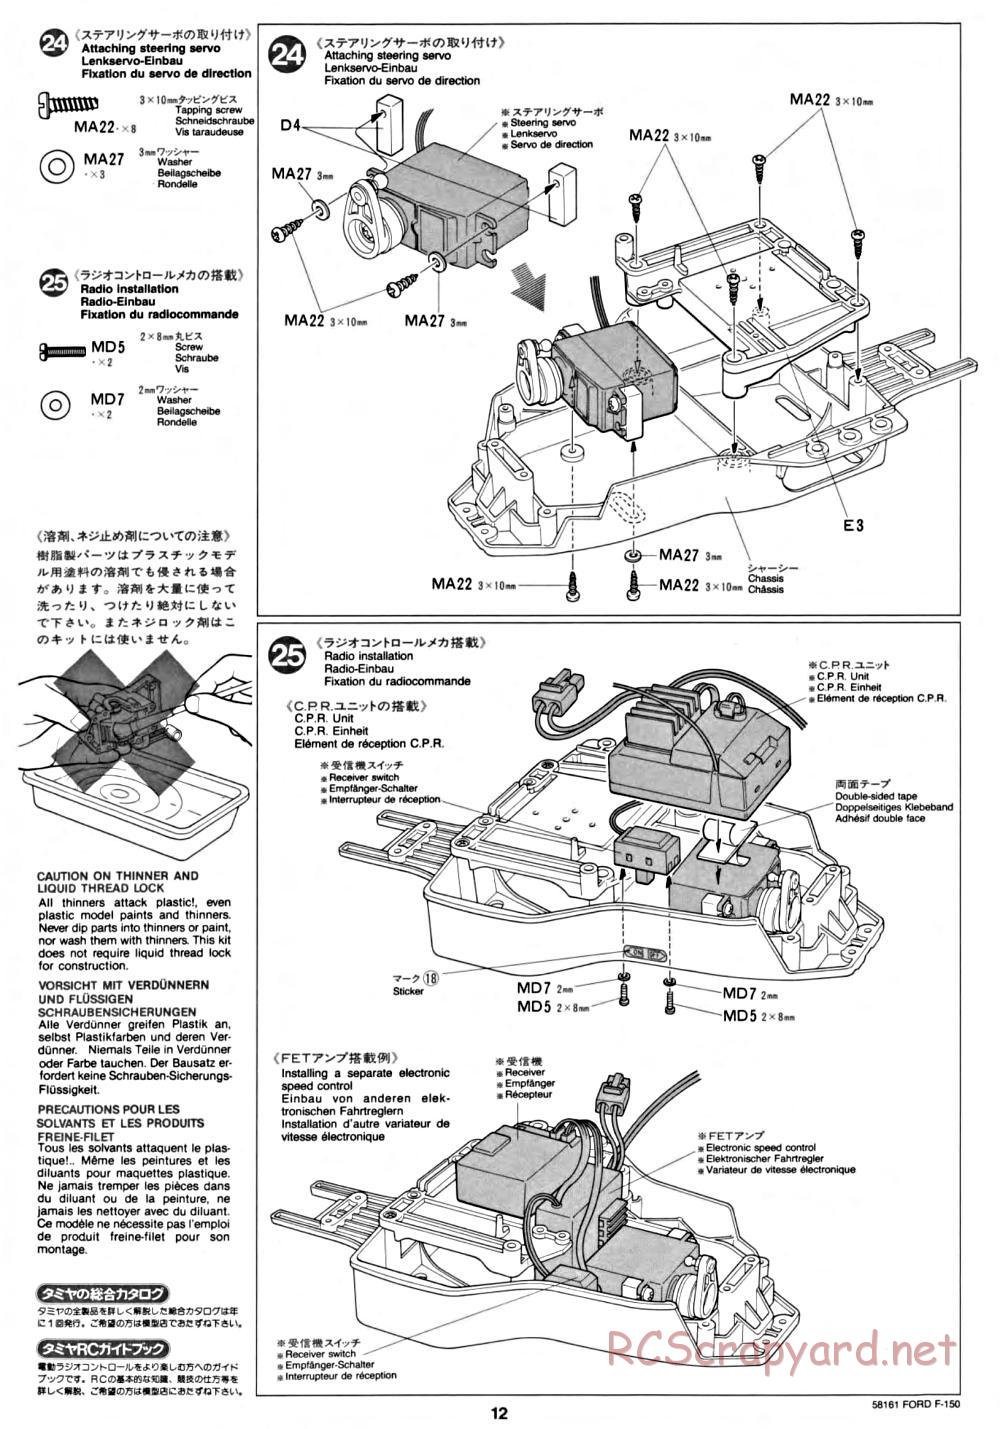 Tamiya - Ford F-150 Truck Chassis - Manual - Page 12